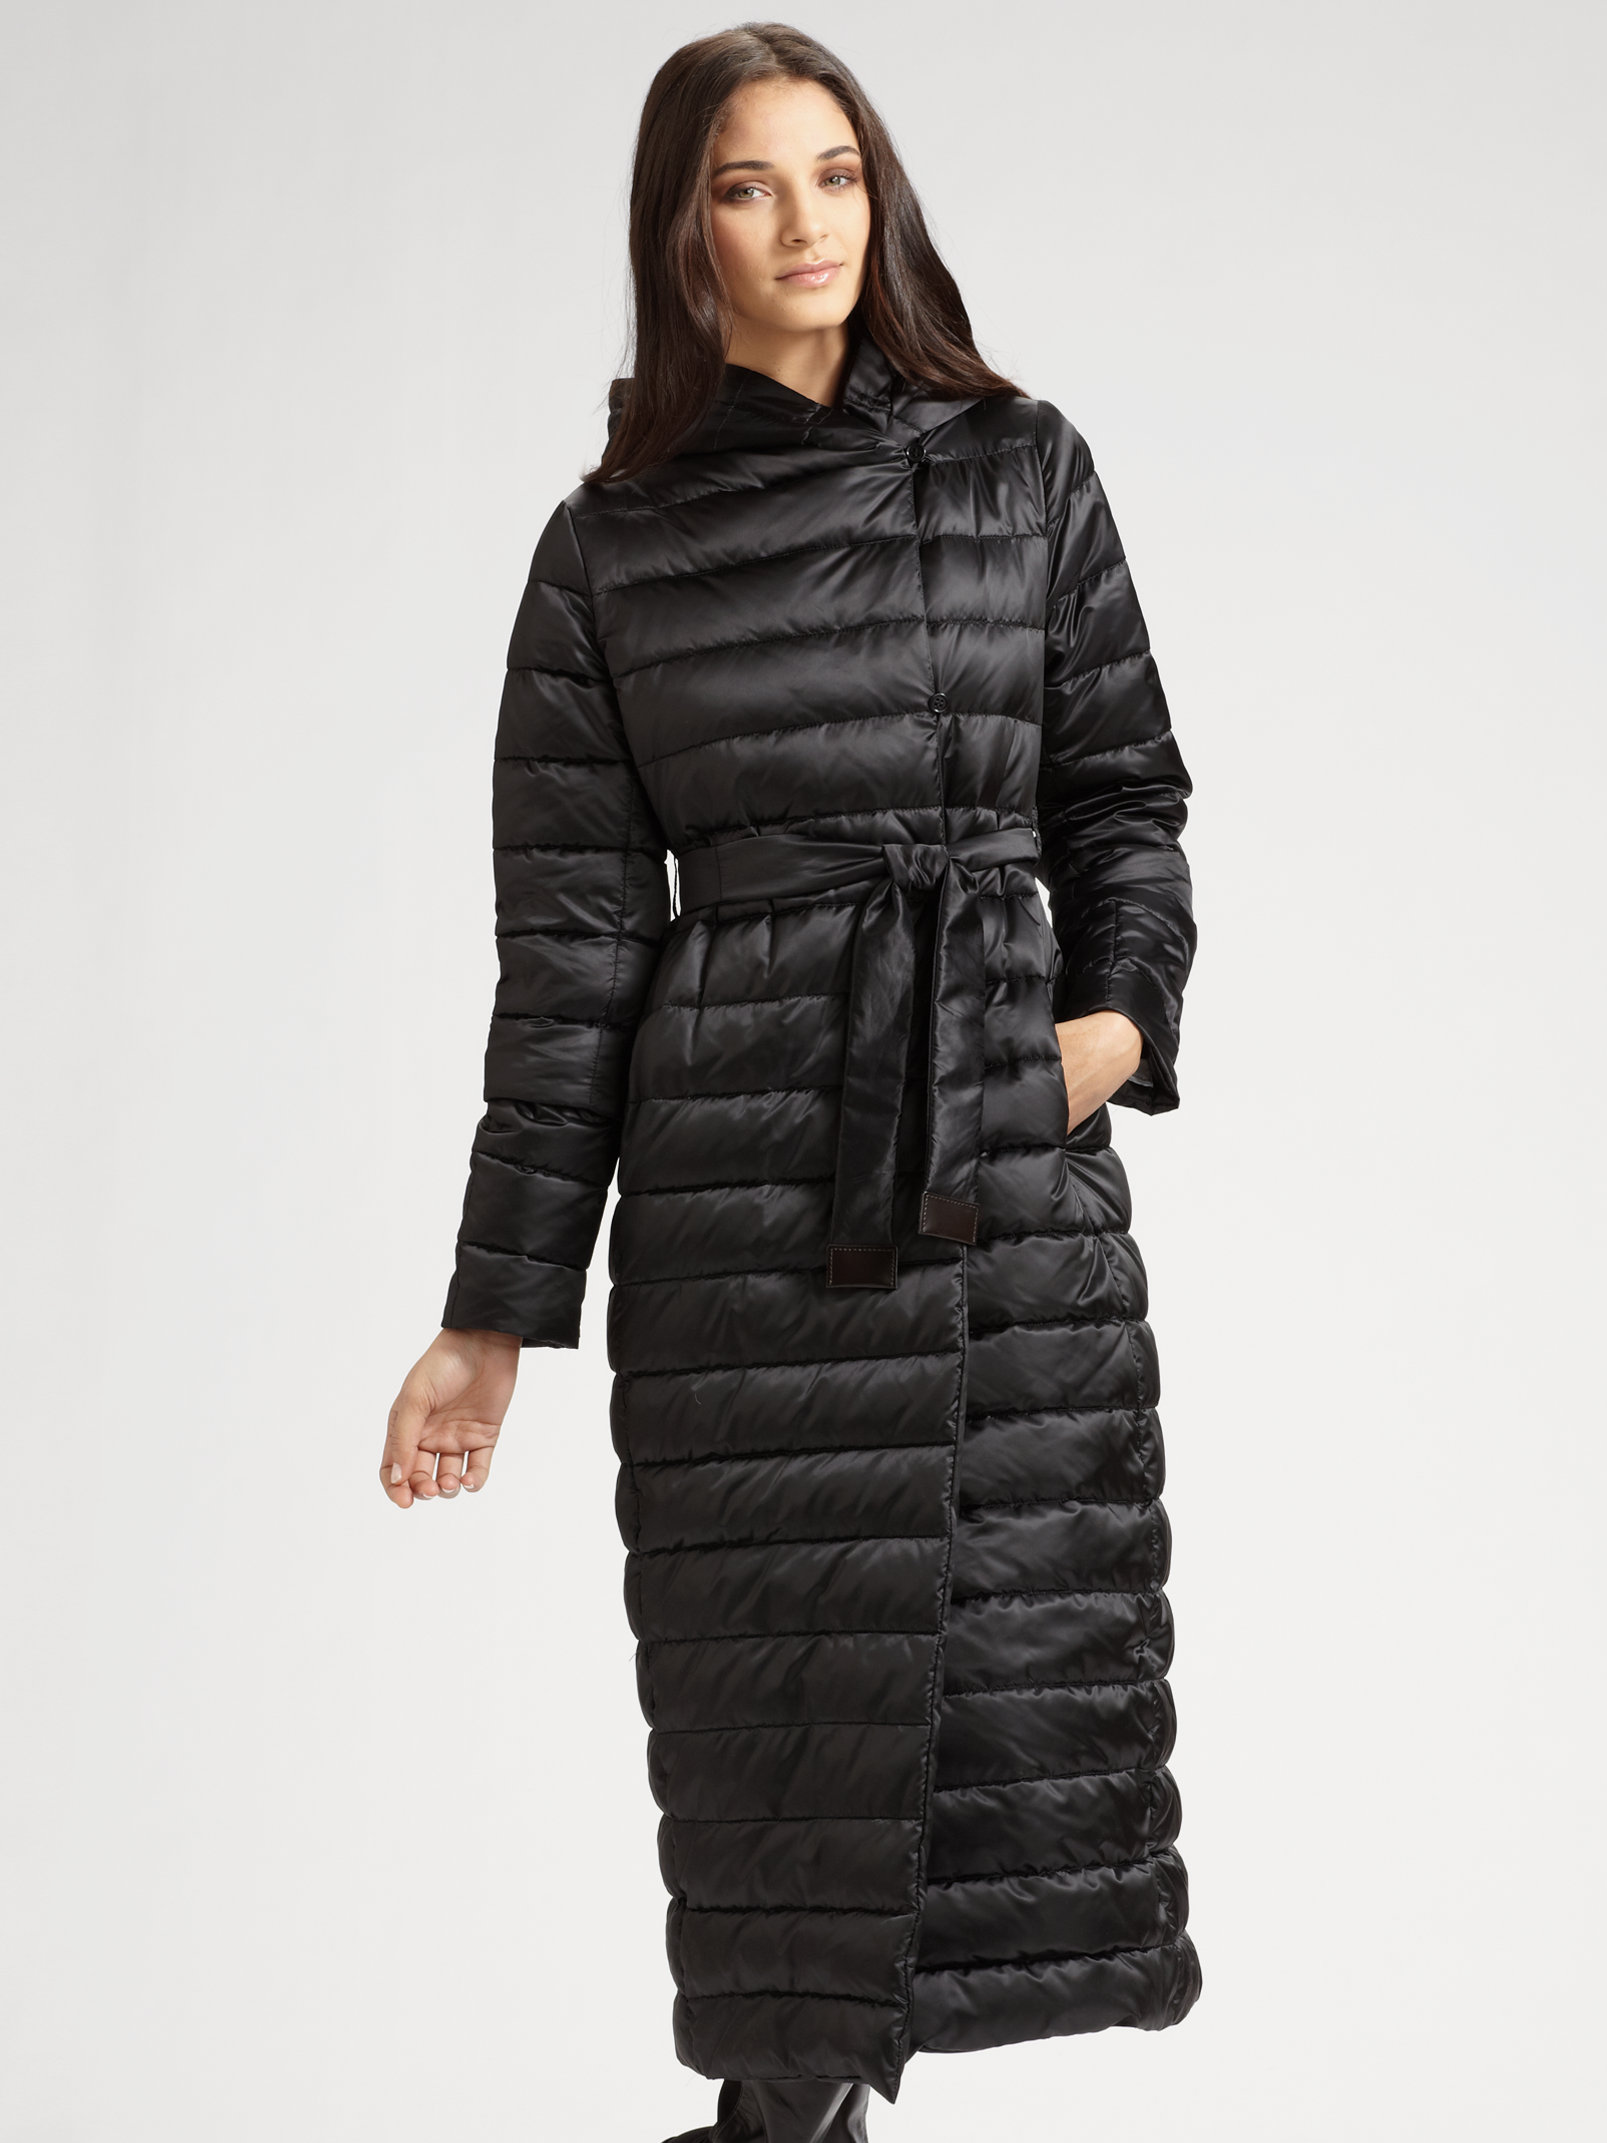 Max Mara Quilted Coats on Sale, SAVE 49% - mpgc.net